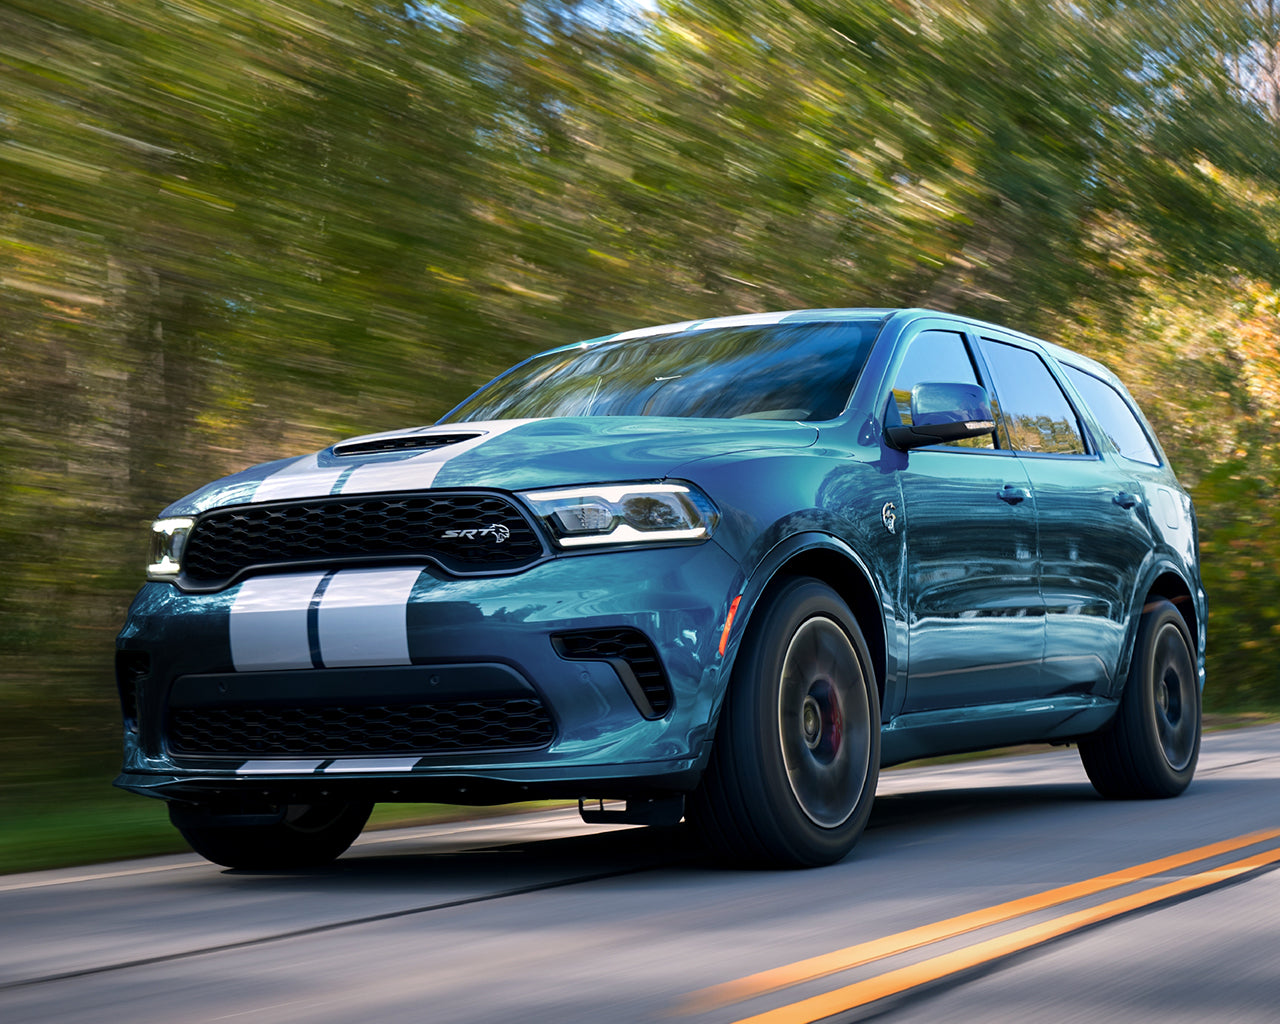 Light Blue Dodge Durango with white racing stripes on the front bumper and hood, driving on a road passing trees in background